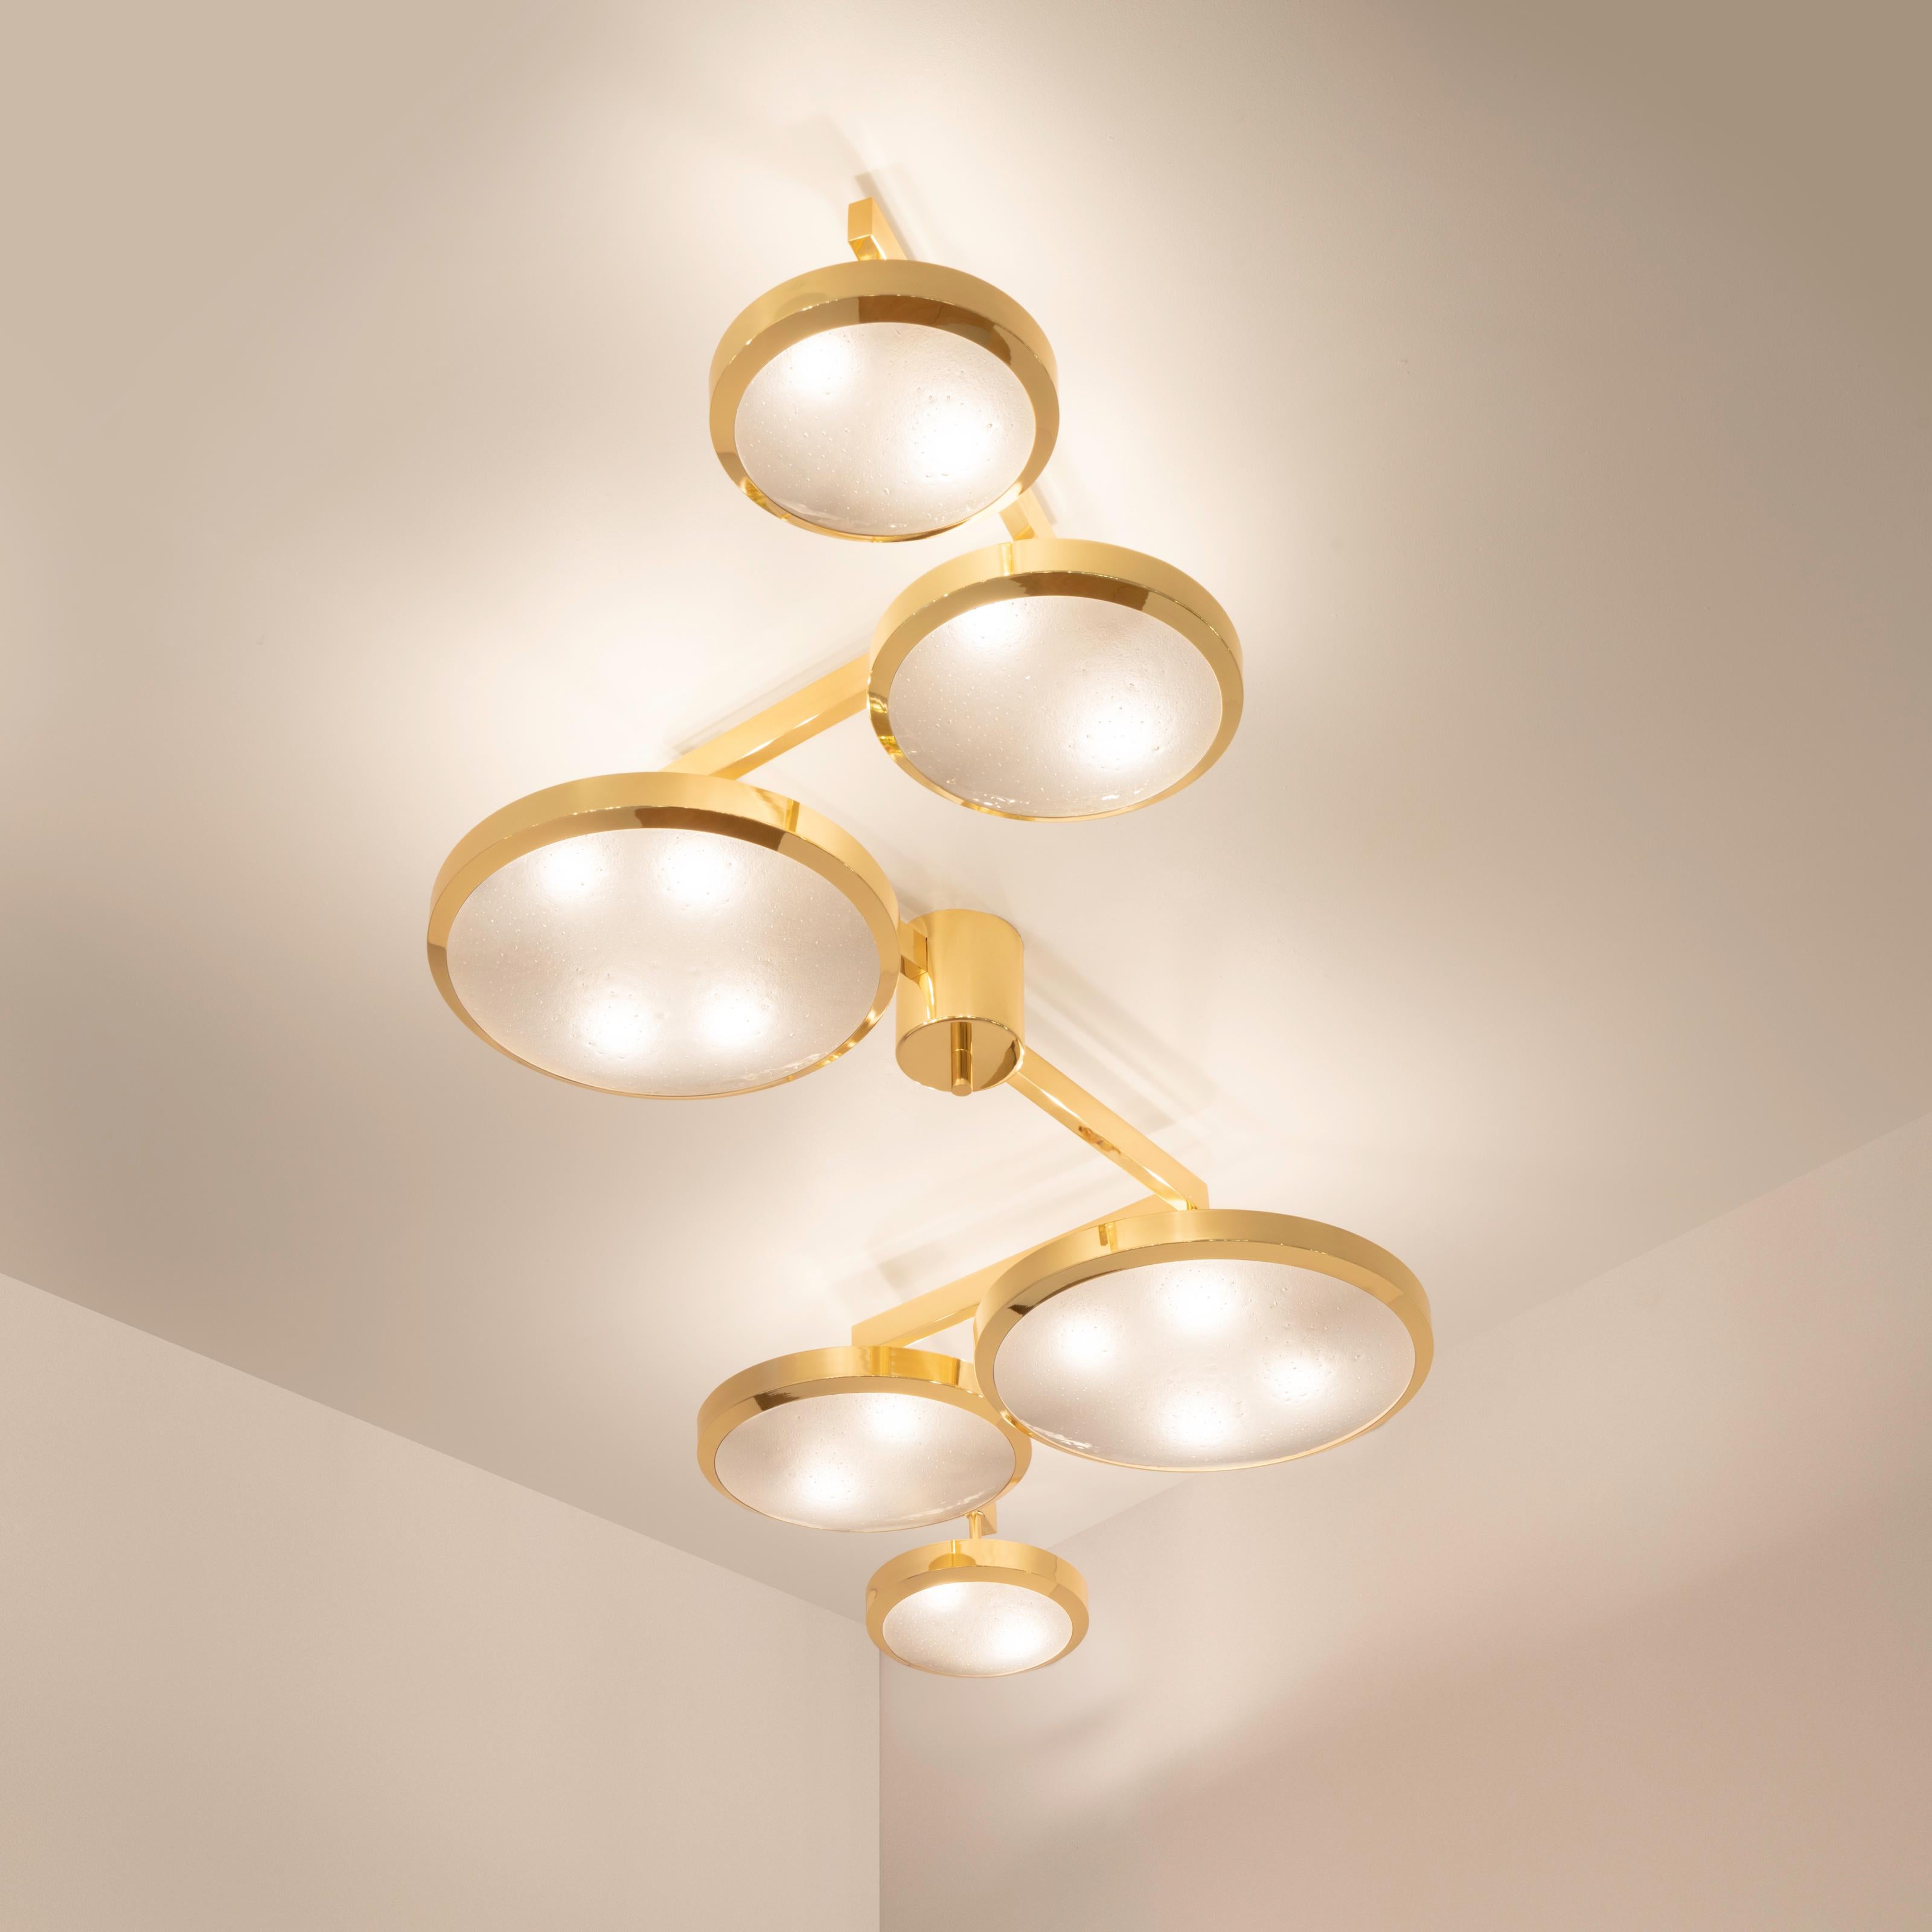 Geometria Sospesa Ceiling Light by Gaspare Asaro-Polished Nickel Finish In New Condition For Sale In New York, NY